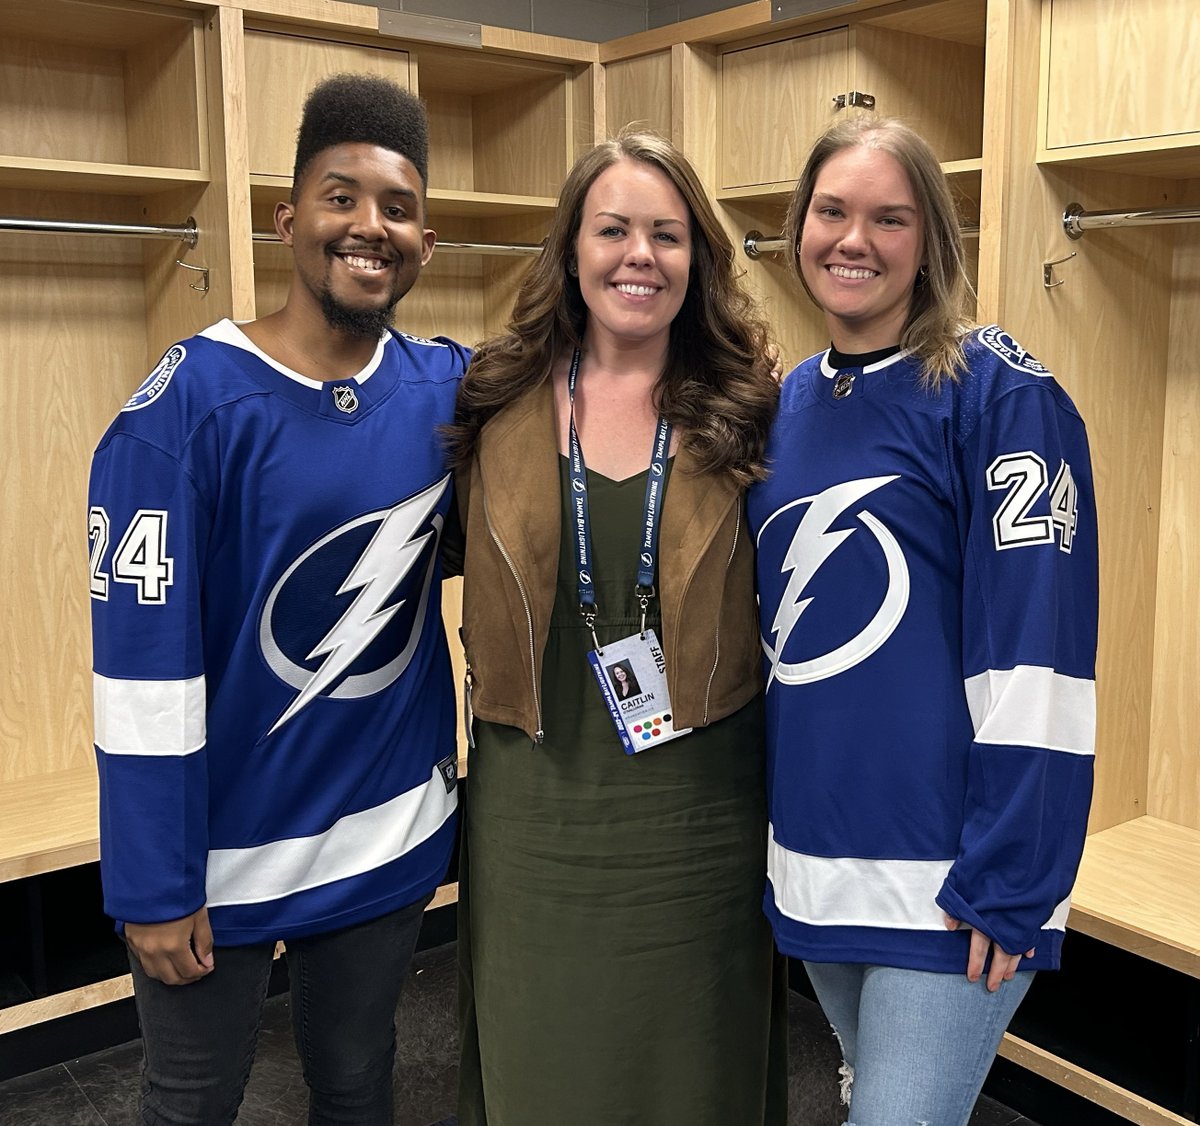 Most of u know Josh Felder as 1 of the stars in the film Champions, or have seen him dance w/The Weeknd at the Super Bowl. Well, this past weekend he did something really special at the @TampaBayLightning home game. #Inclusion #Autism #IDD FULL STORY 👉 loom.ly/t9WcAPQ